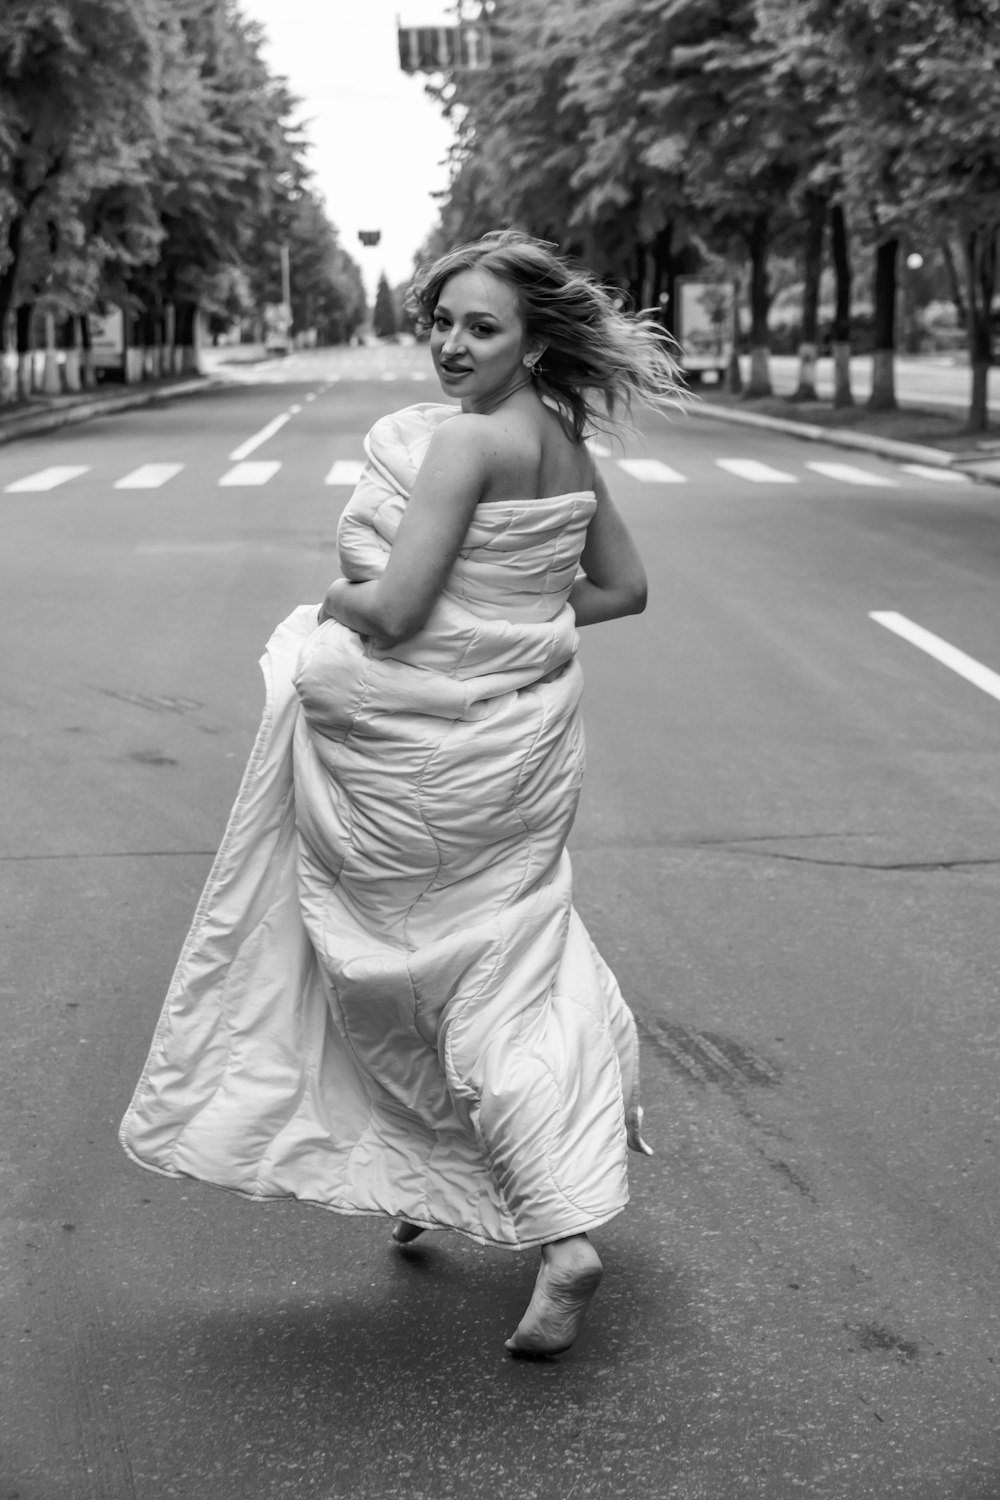 grayscale photo of woman in dress standing on road